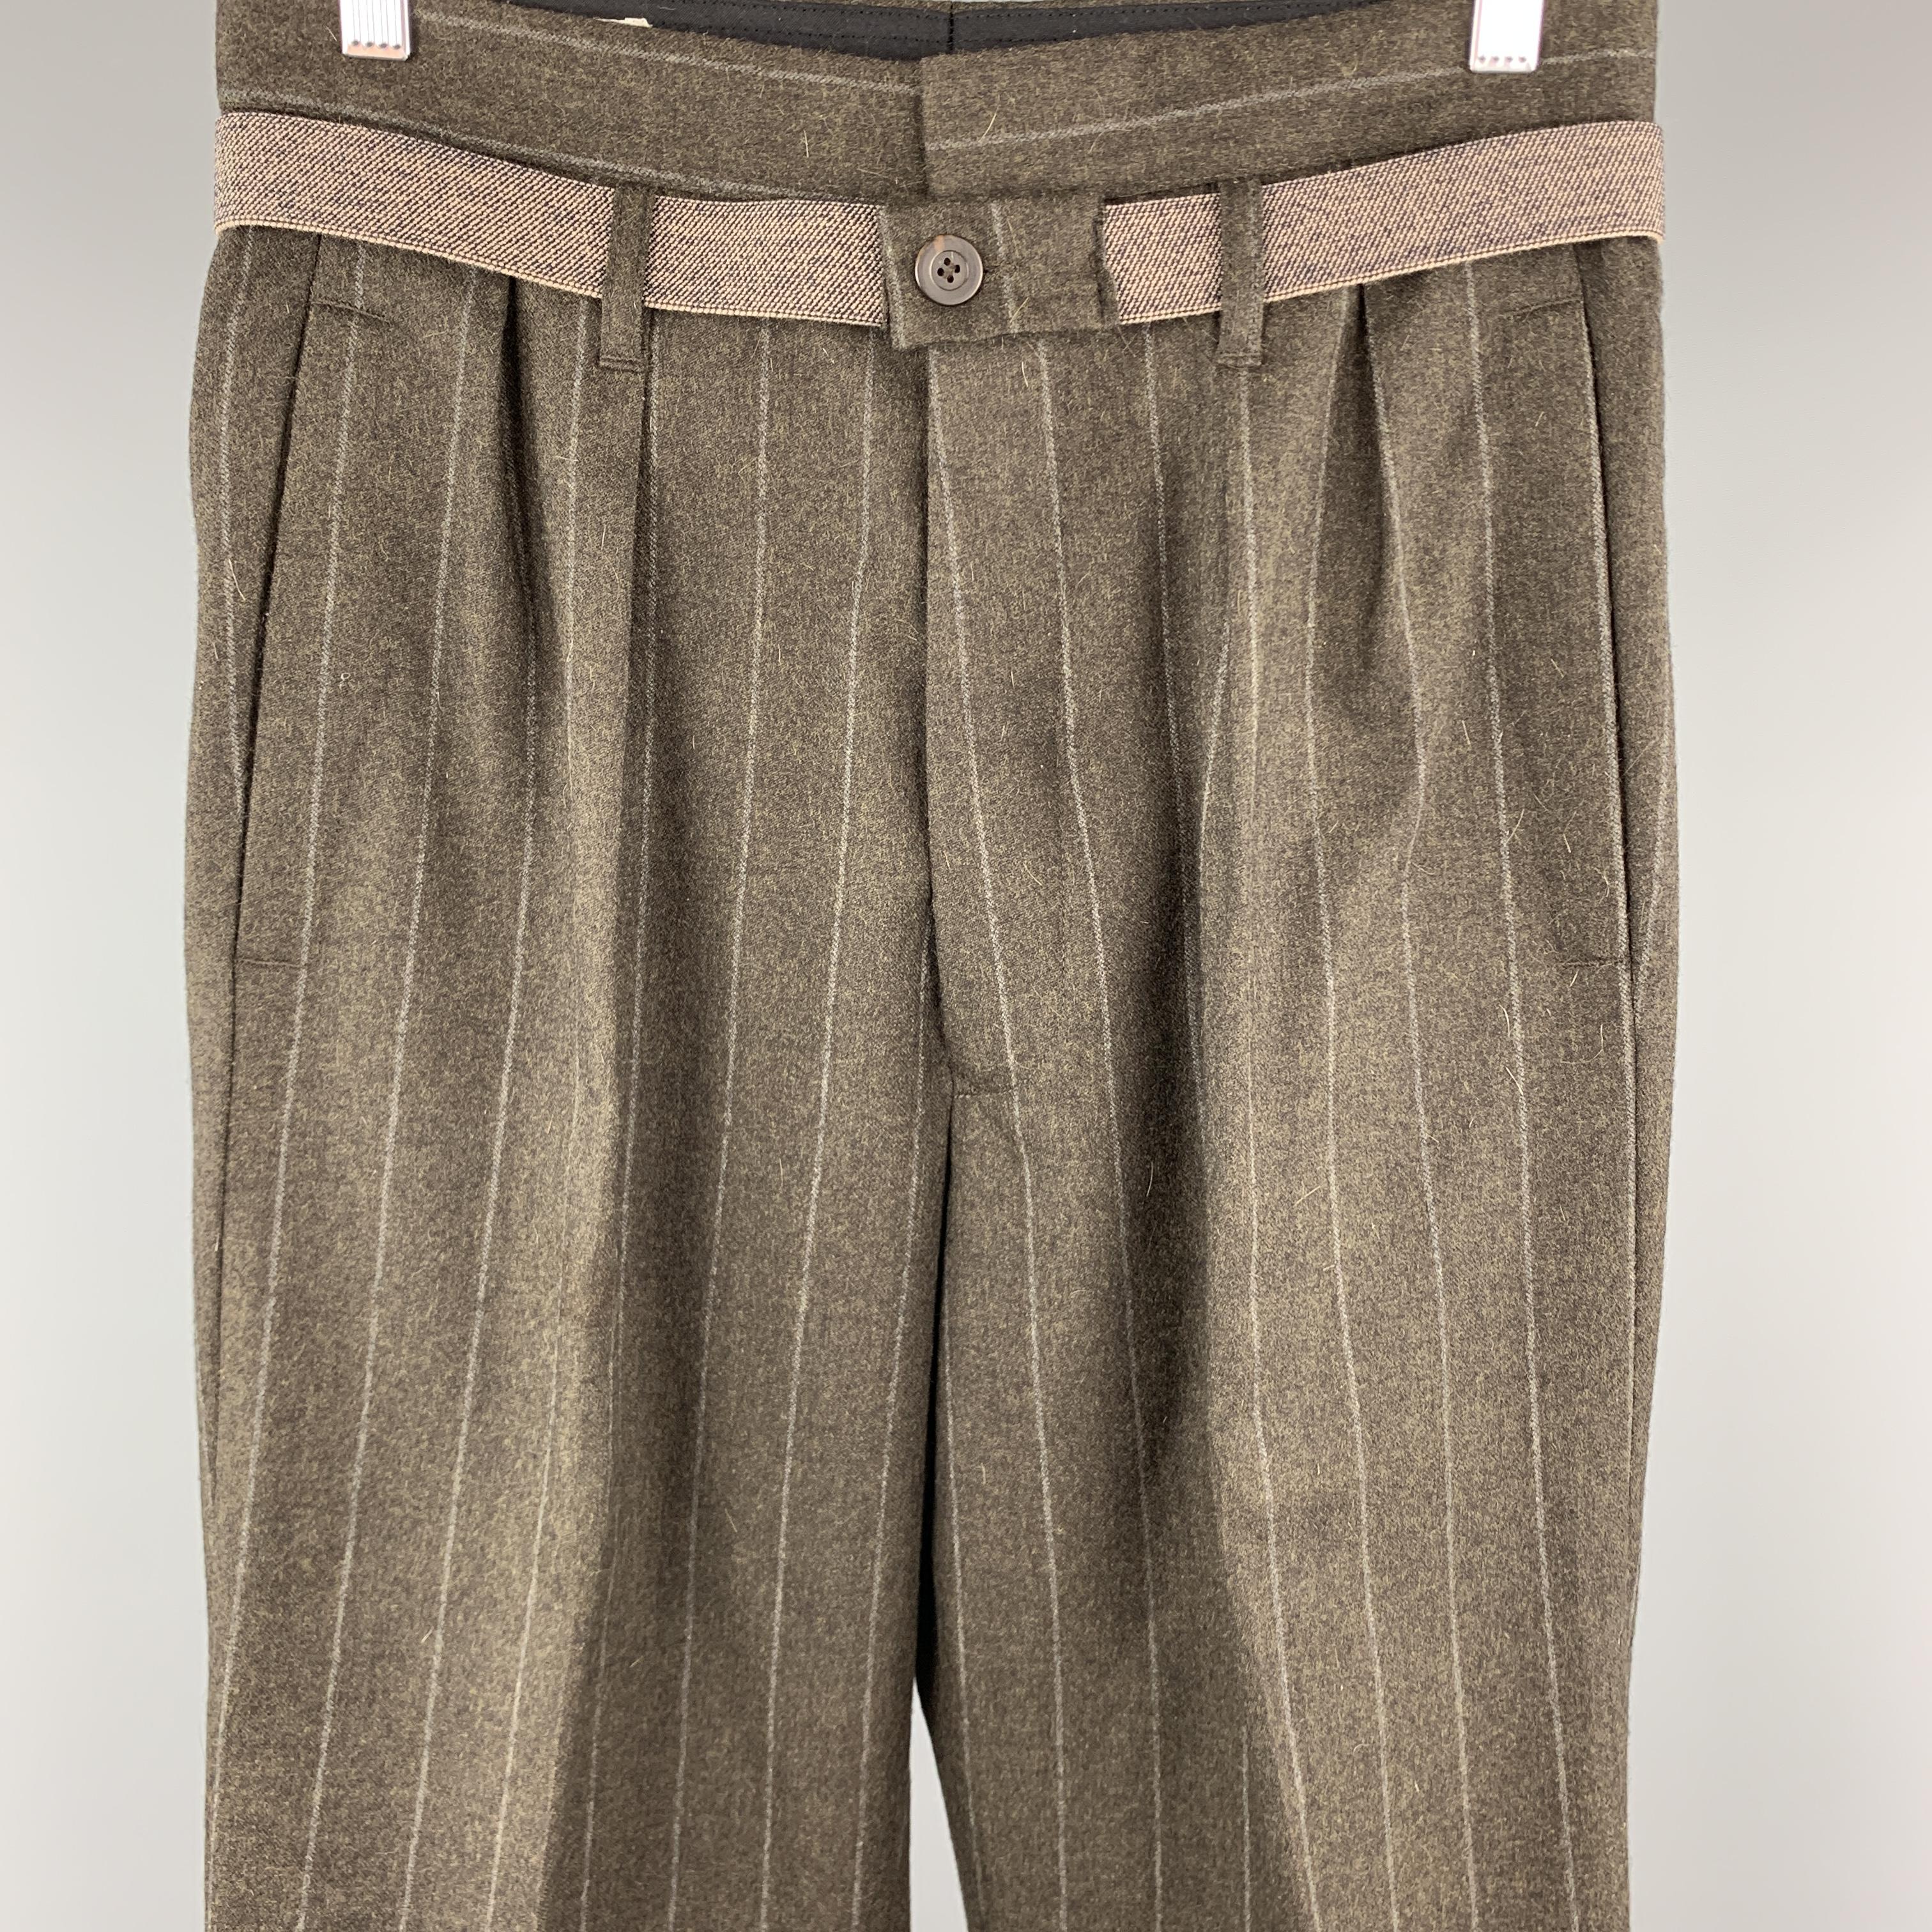 DRIES VAN NOTEN dress pants come in earthy brown wool cashmere blend with an elastic belt, wide cuffed leg, and double pleat. Made in Belgium.

Excellent Pre-Owned Condition.
Marked: IT 46

Measurements:

Waist: 29 in.
Rise: 14.5 in.
Inseam: 28